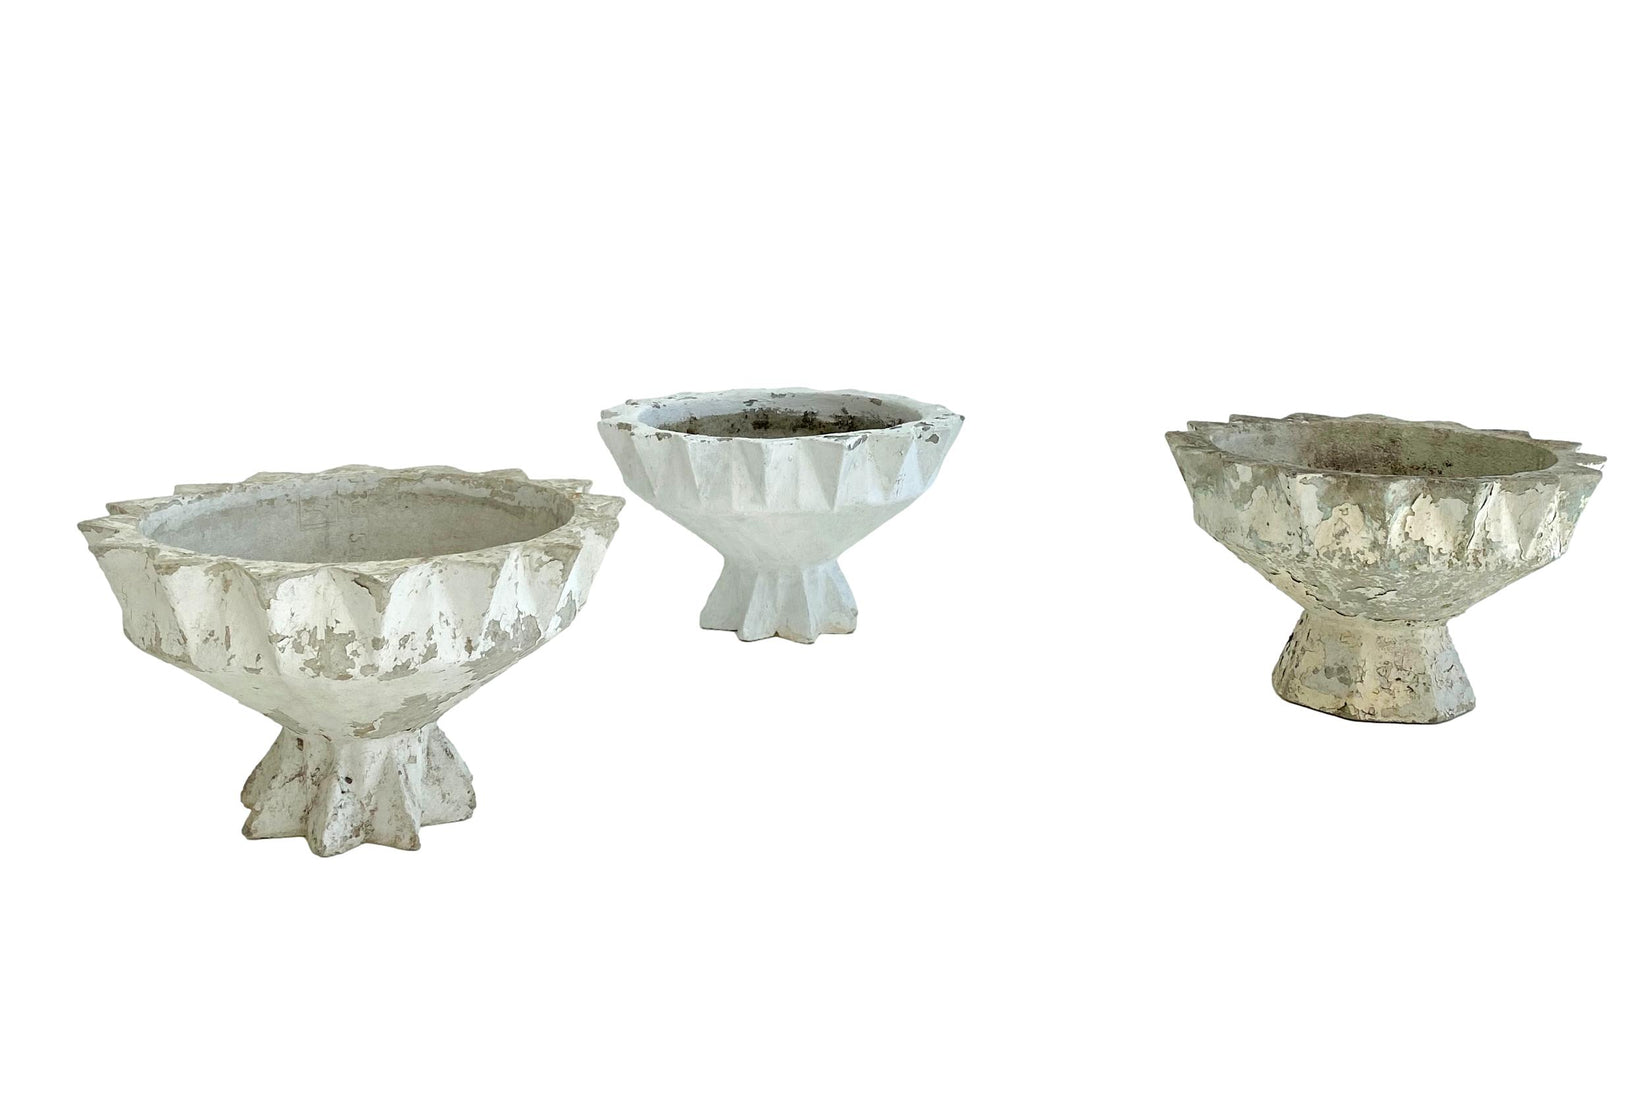 Willy Guhl Chalice Shaped Planter